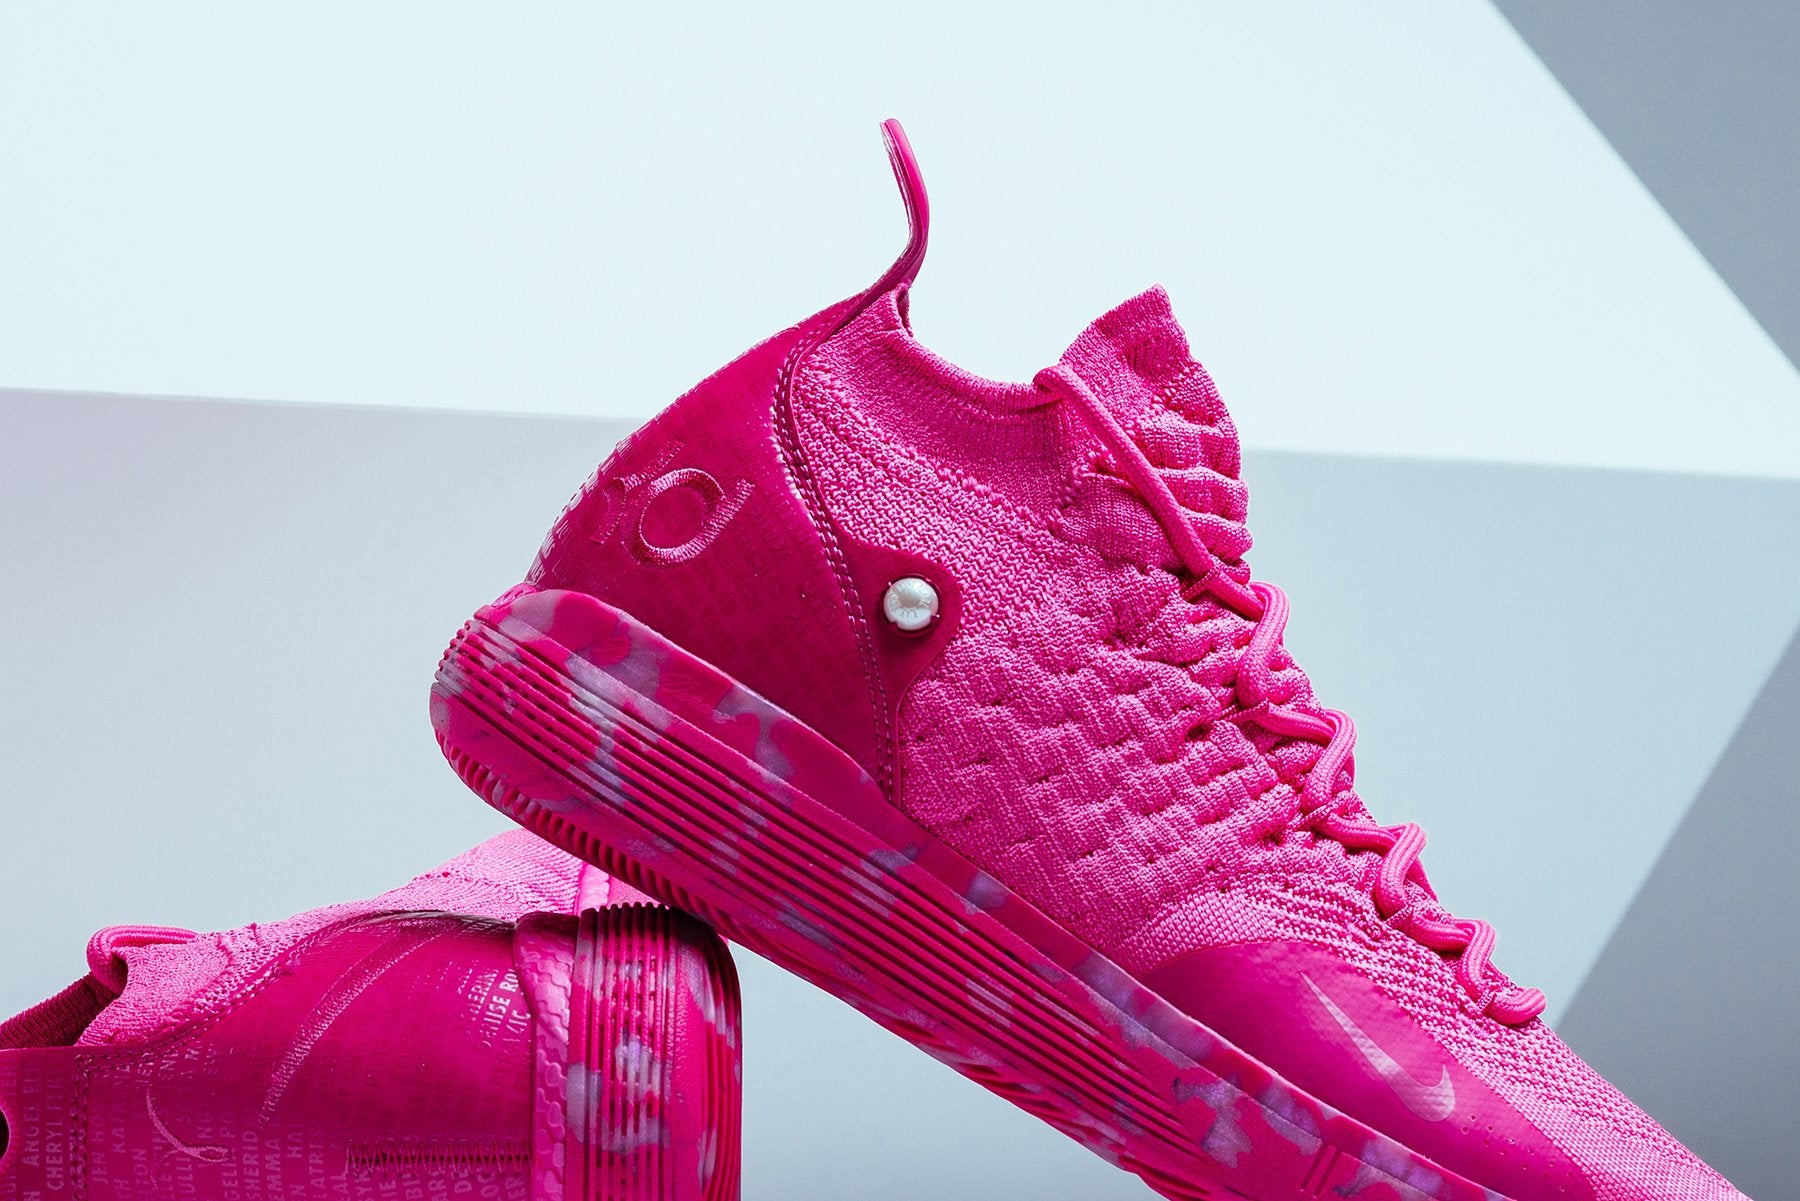 kevin durant 11 aunt pearl